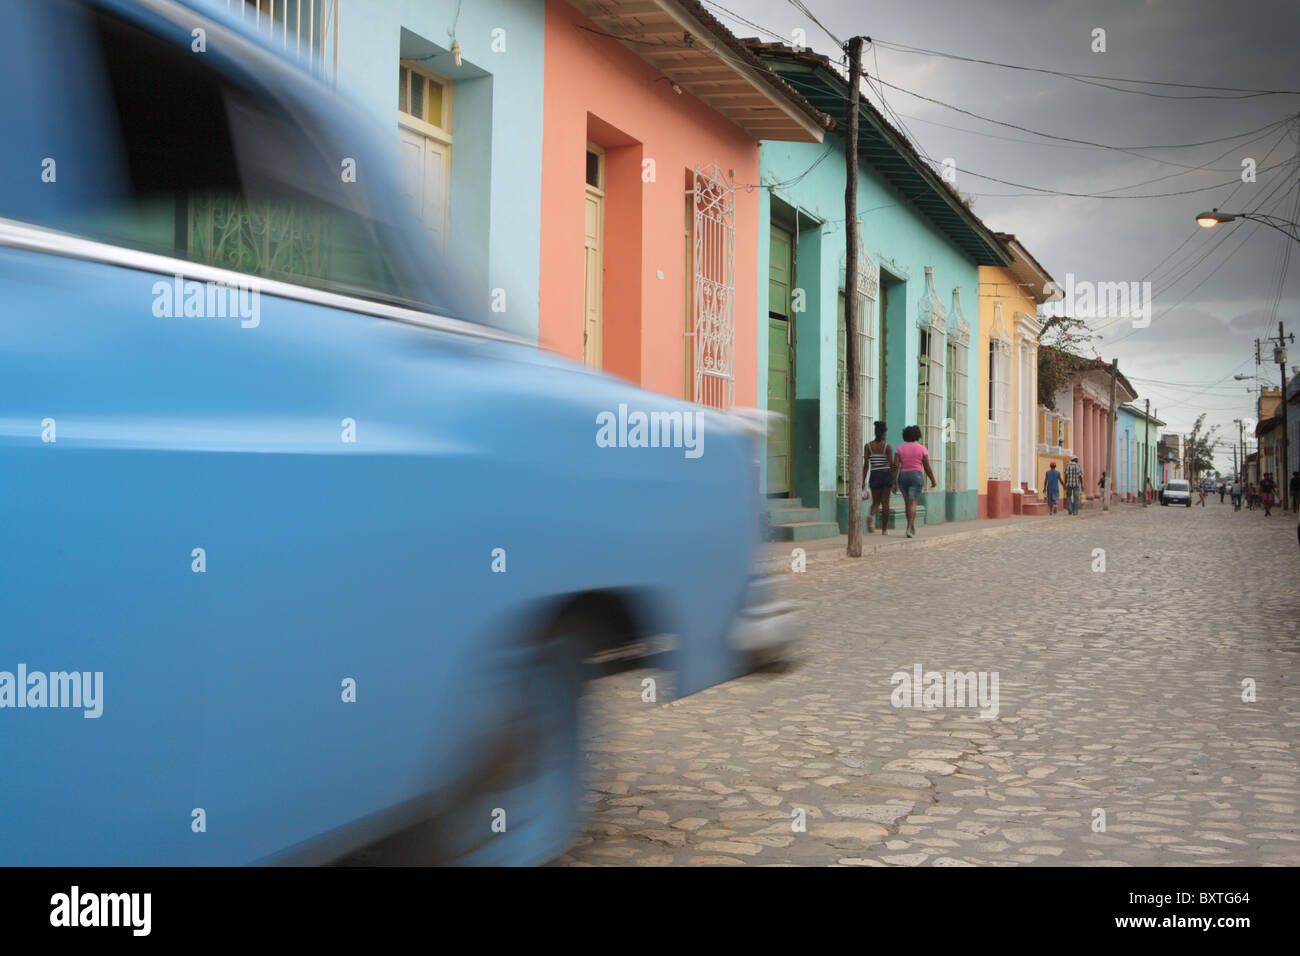 TRINIDAD: CLASSIC CAR ON COLOURFUL COLONIAL STREET Stock Photo